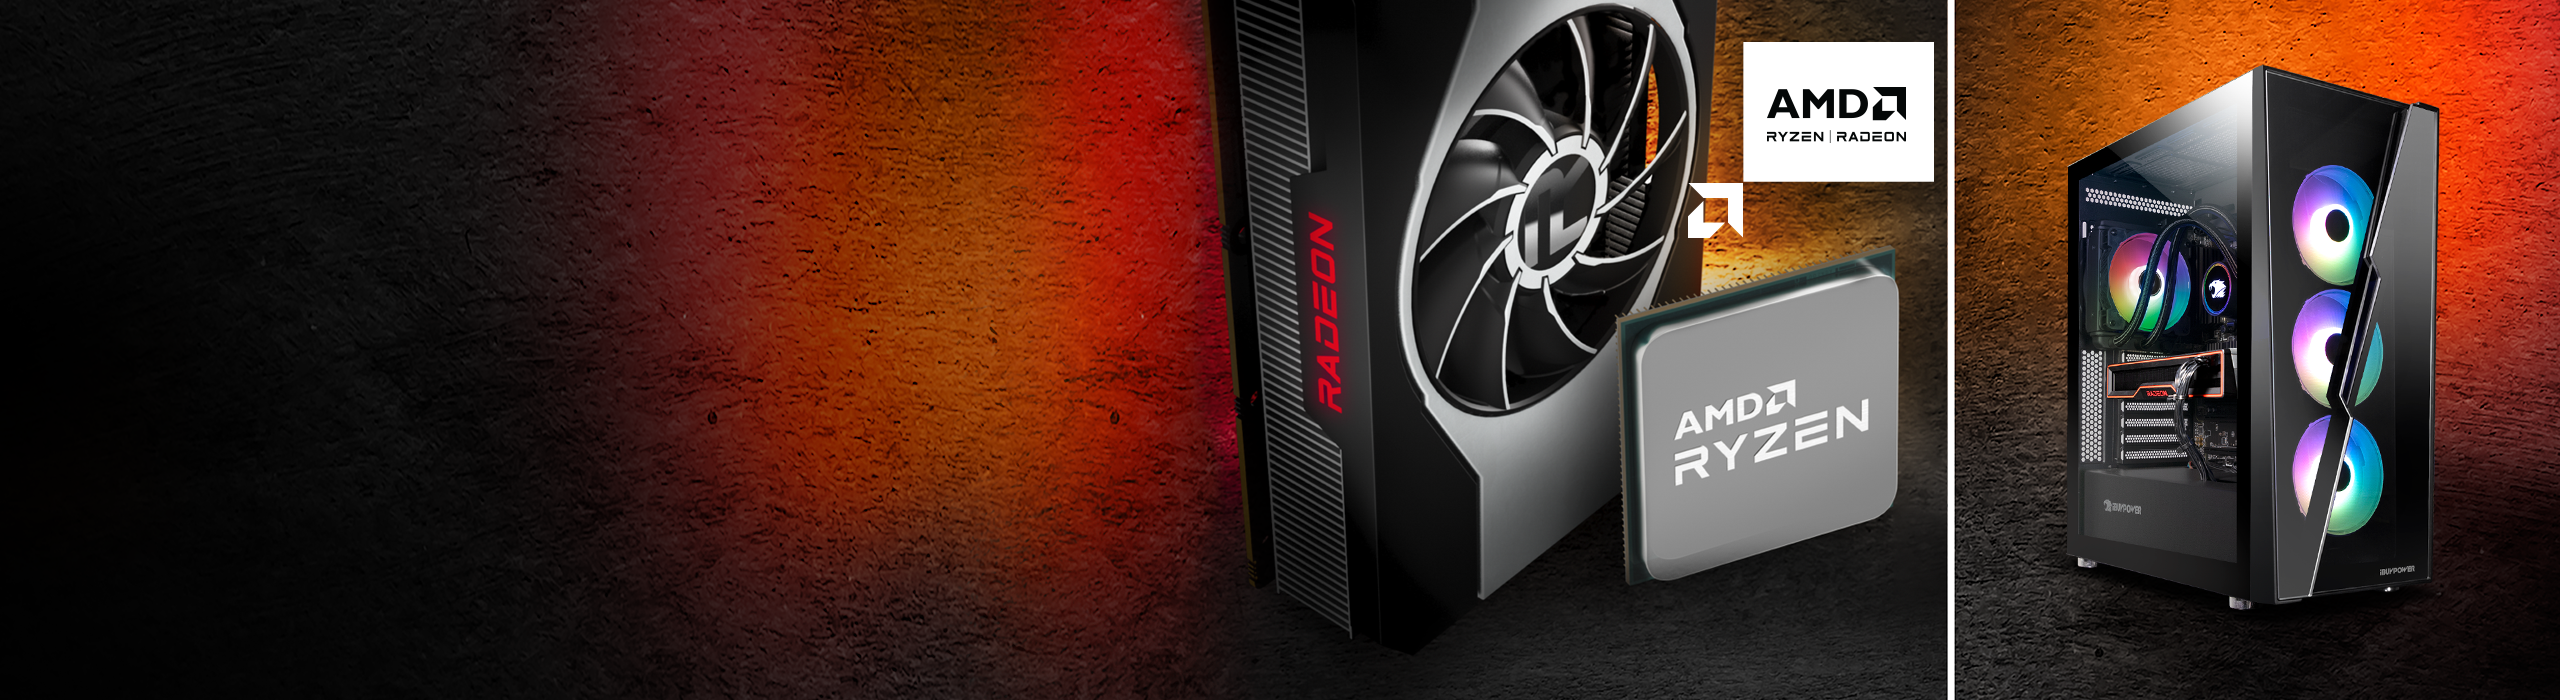 ALL AMD PERFORMANCE.<br/> BUILT TO GAME.